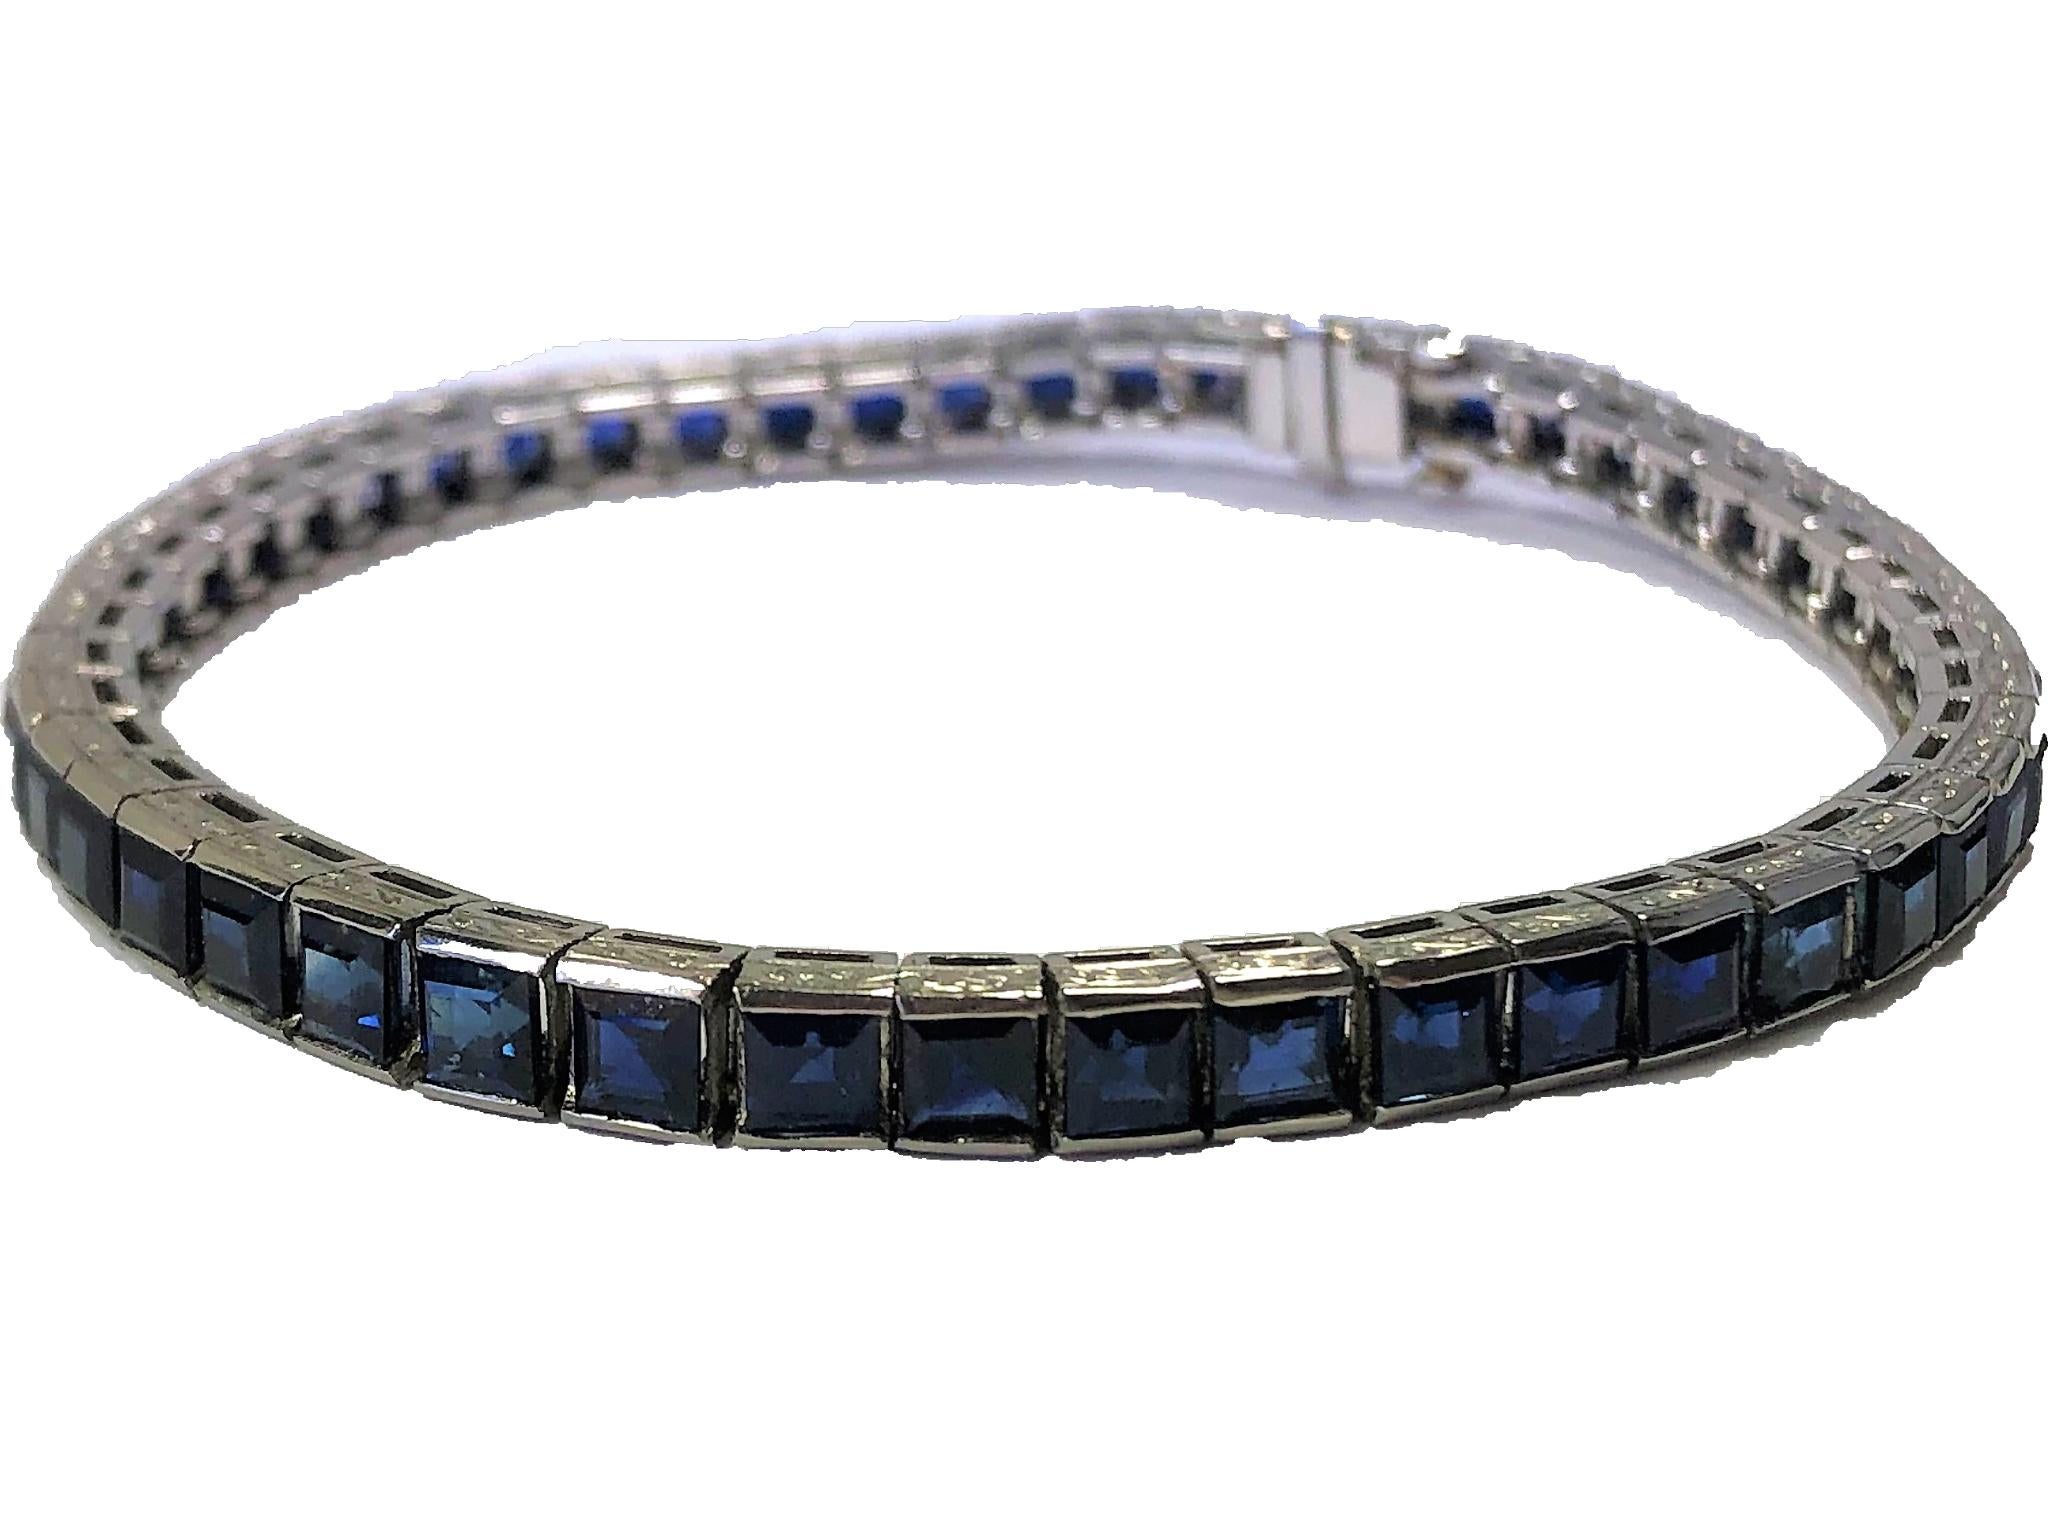 Made of individual platinum blocks set with square cut natural sapphires,
this vintage straight line bracelet has the extra detail of hand engraving on the walls of each block. The deep, rich blue color stands strong against the platinum setting.